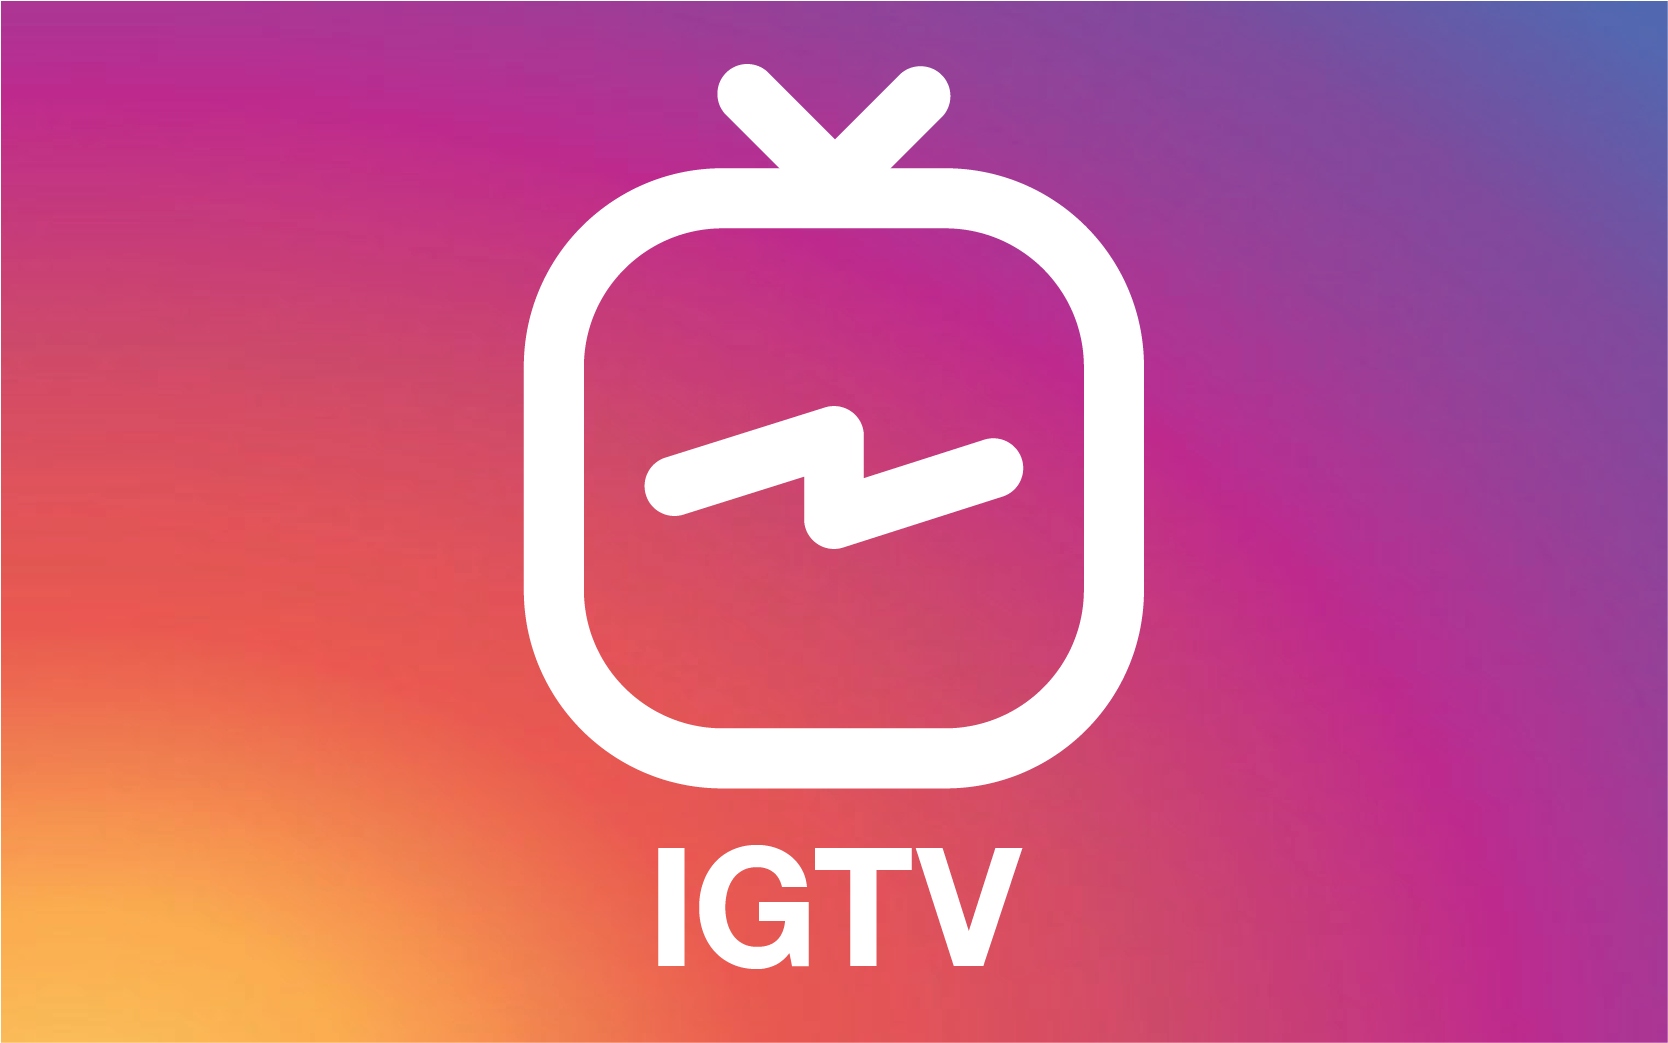 Why is IGTV the Least Used Feature on Instagram?